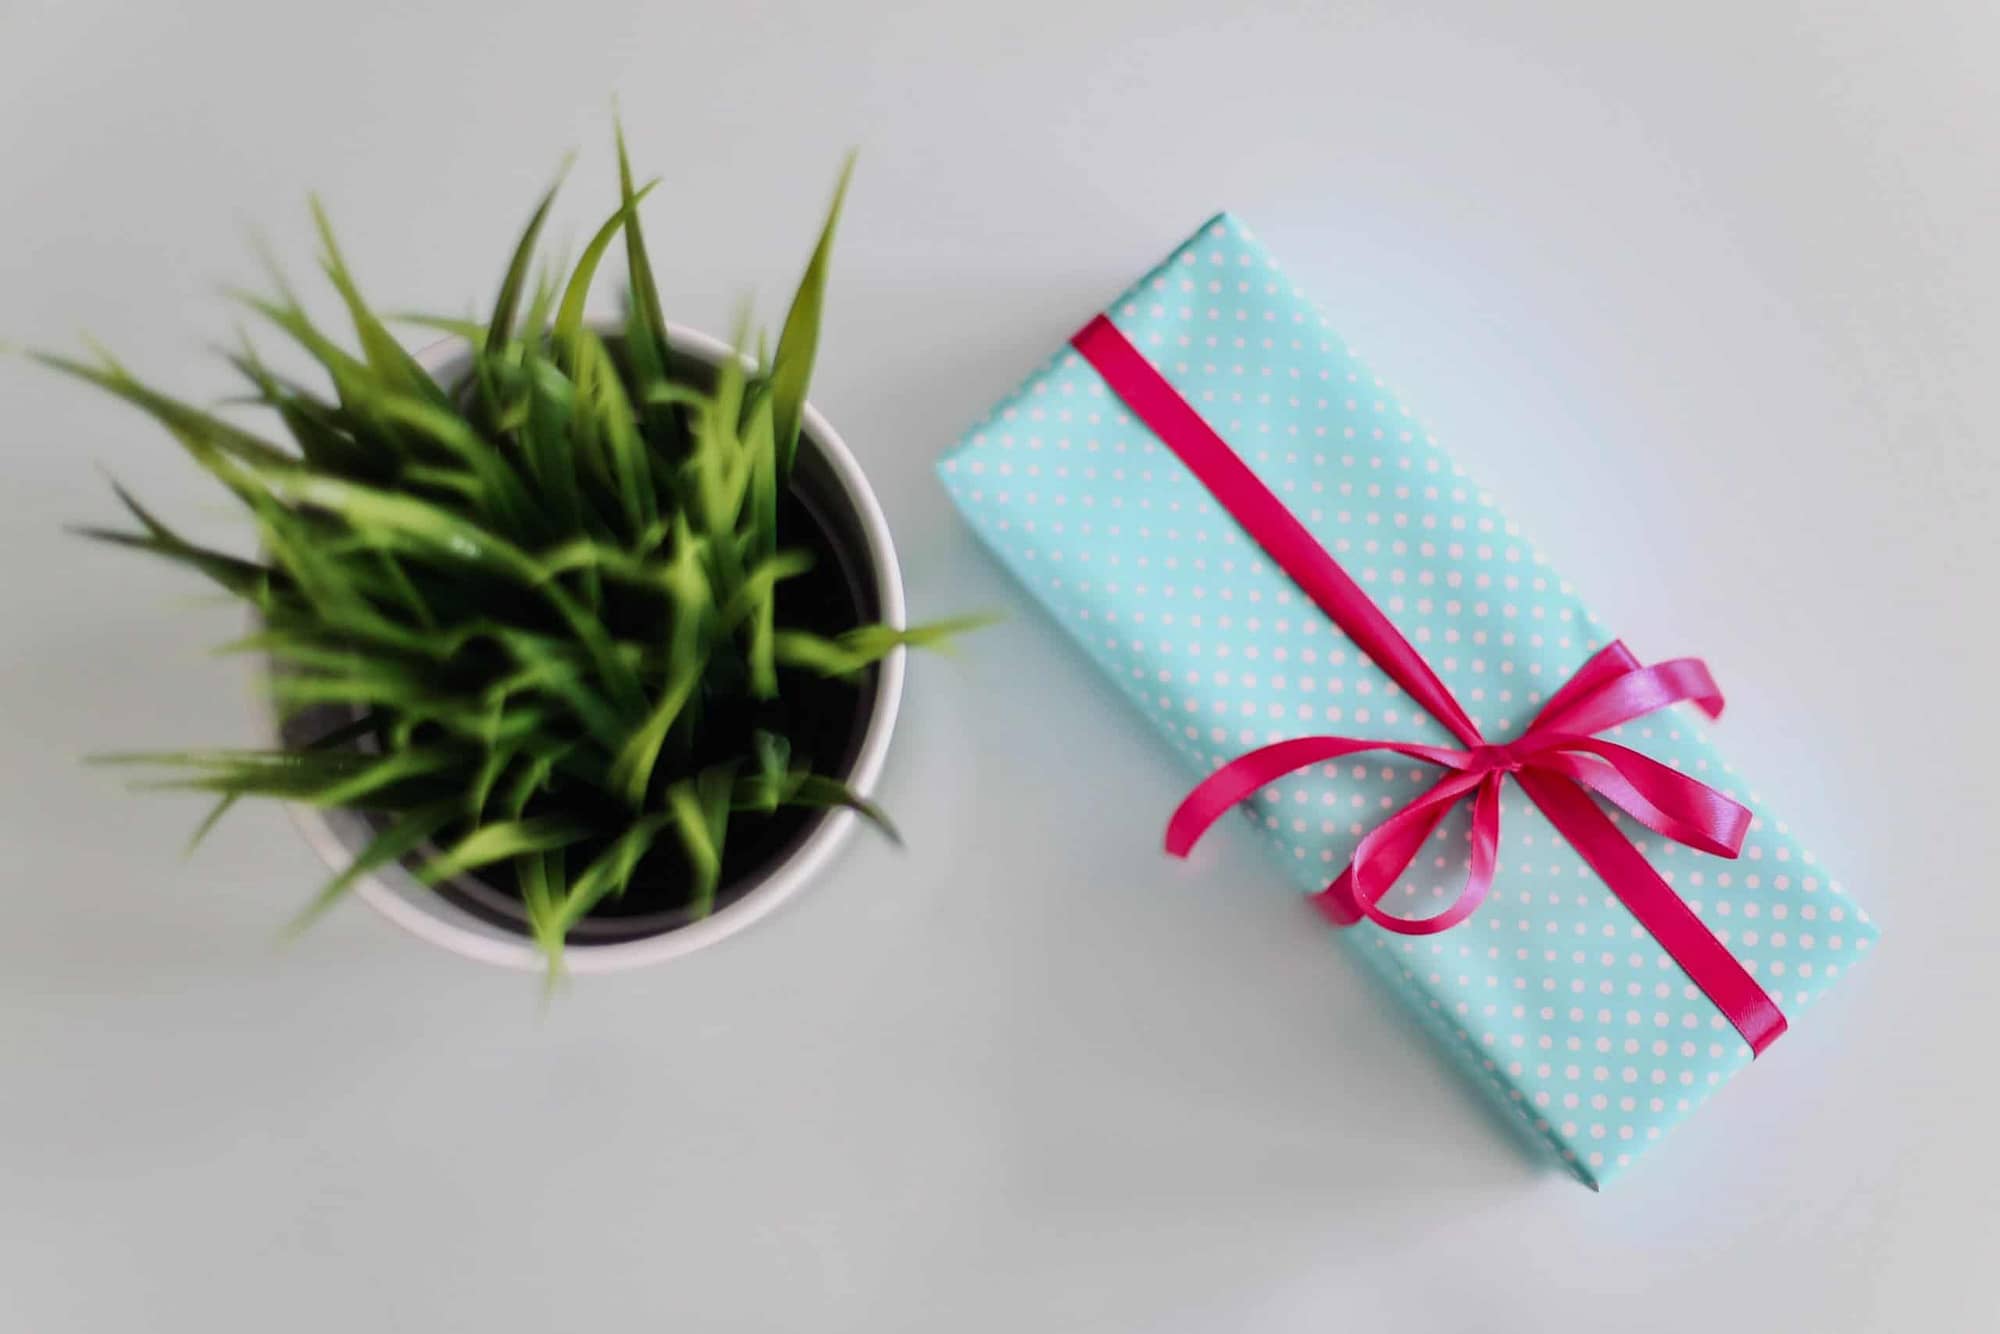 How to use raffles and giveaways to grow your business